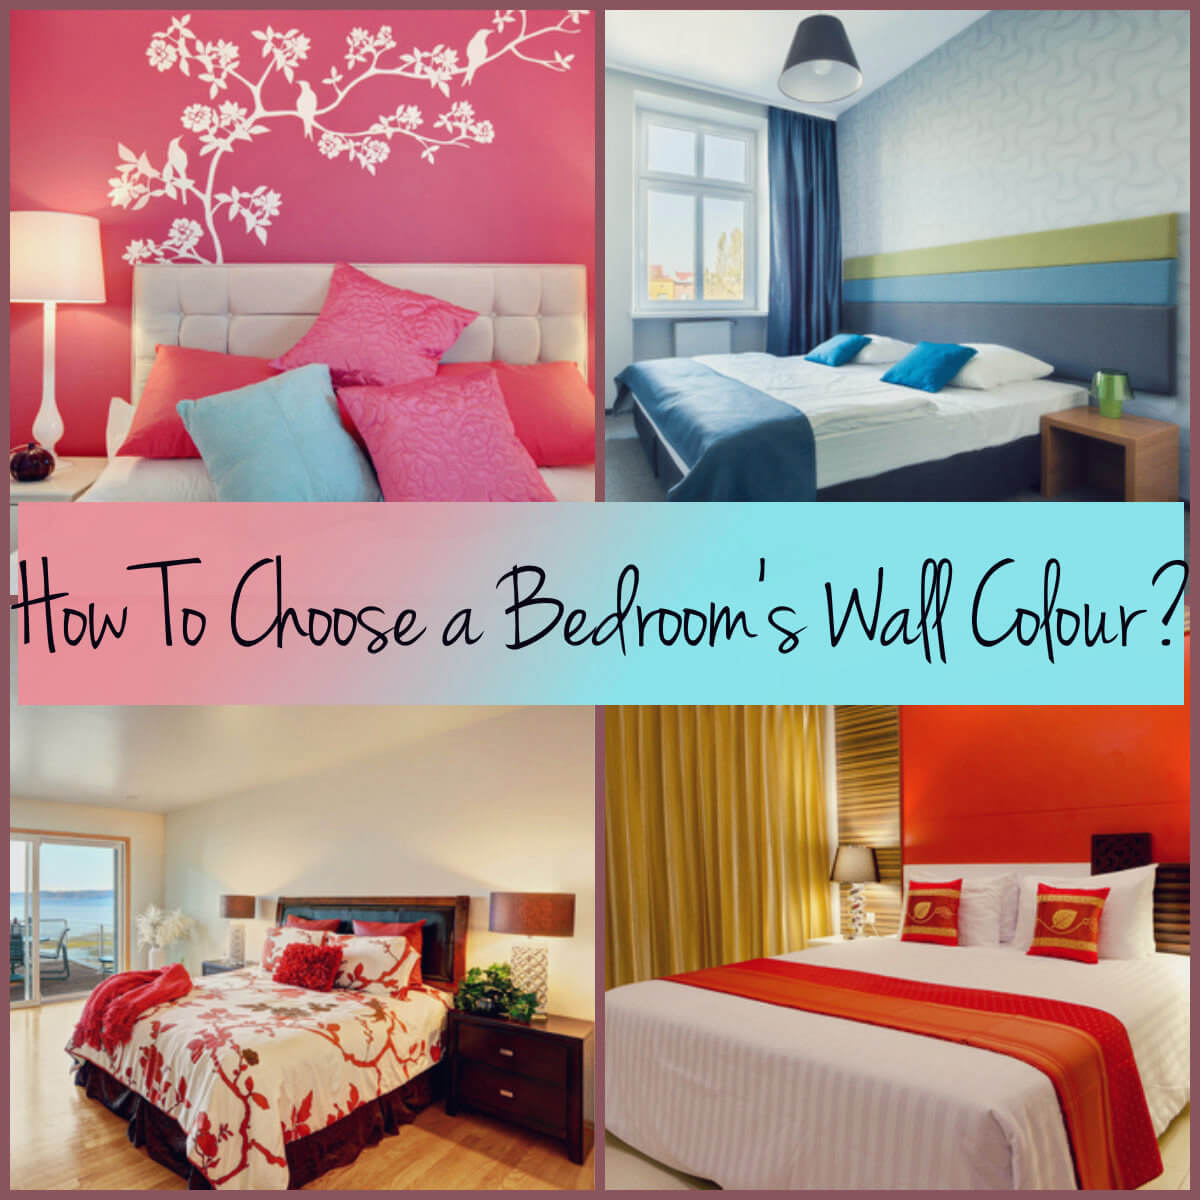 How To Choose A Bedroom S Wall Colour Interior Design Design News And Architecture Trends